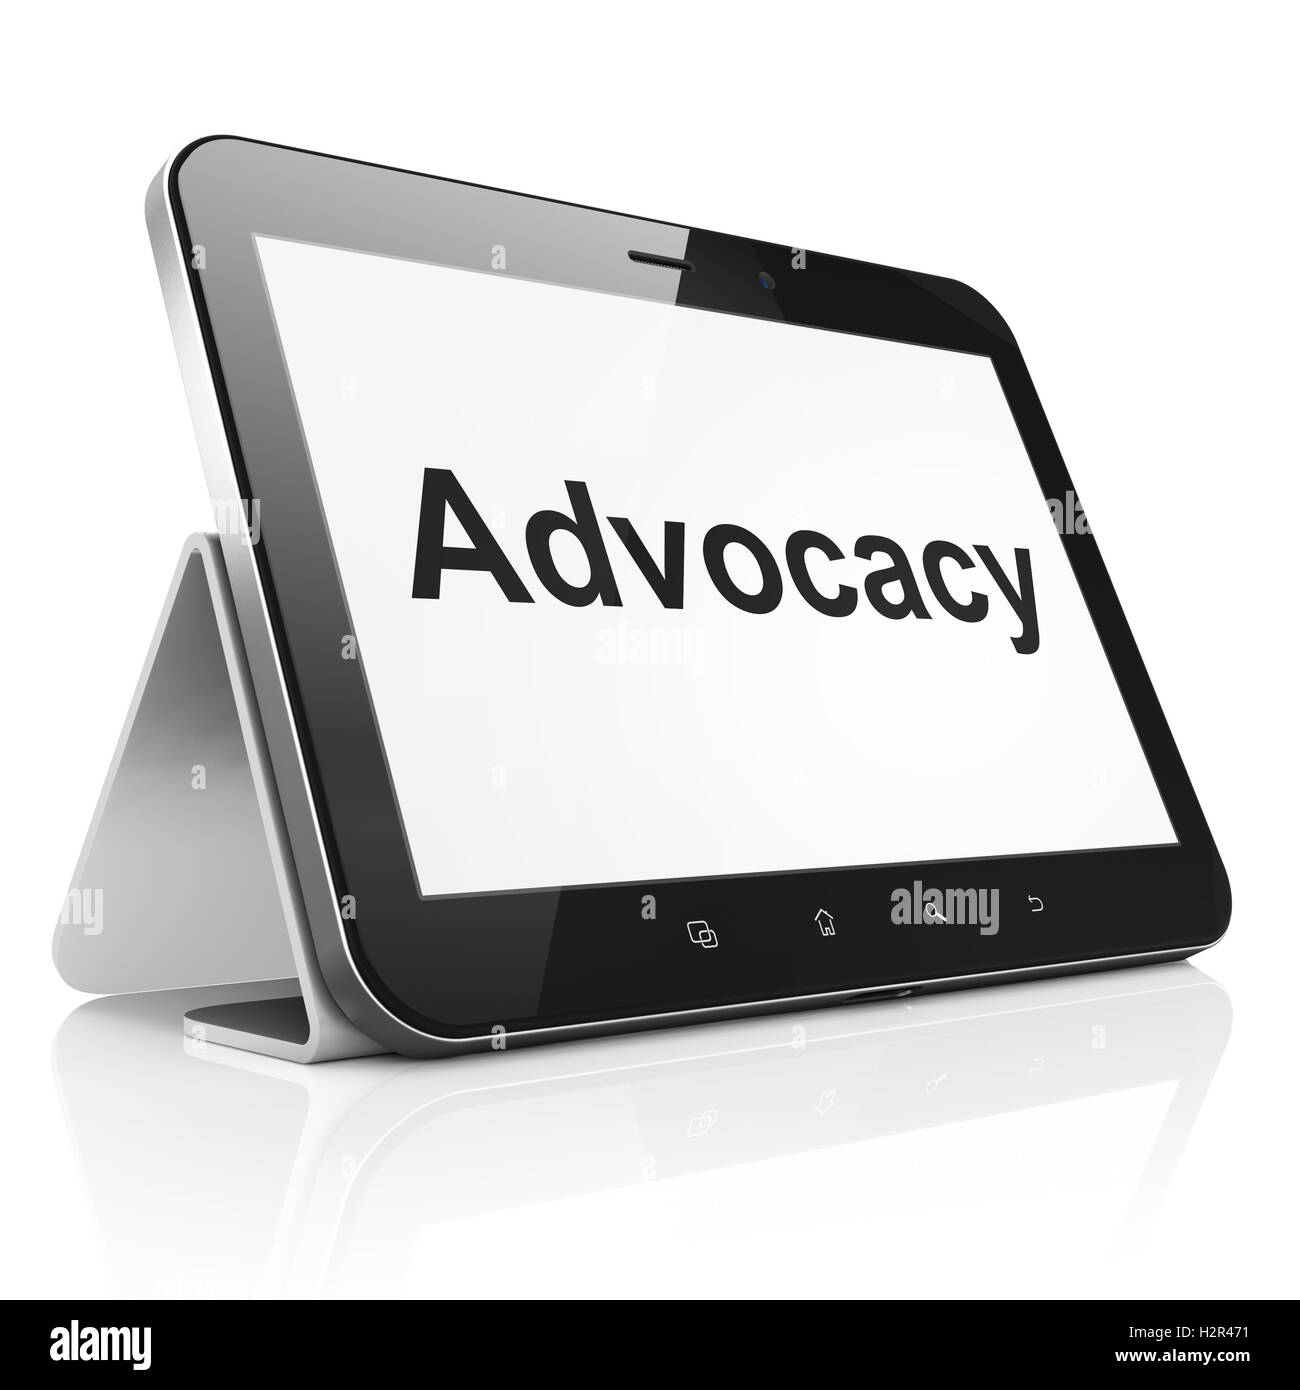 Law concept: Advocacy on tablet pc computer Stock Photo